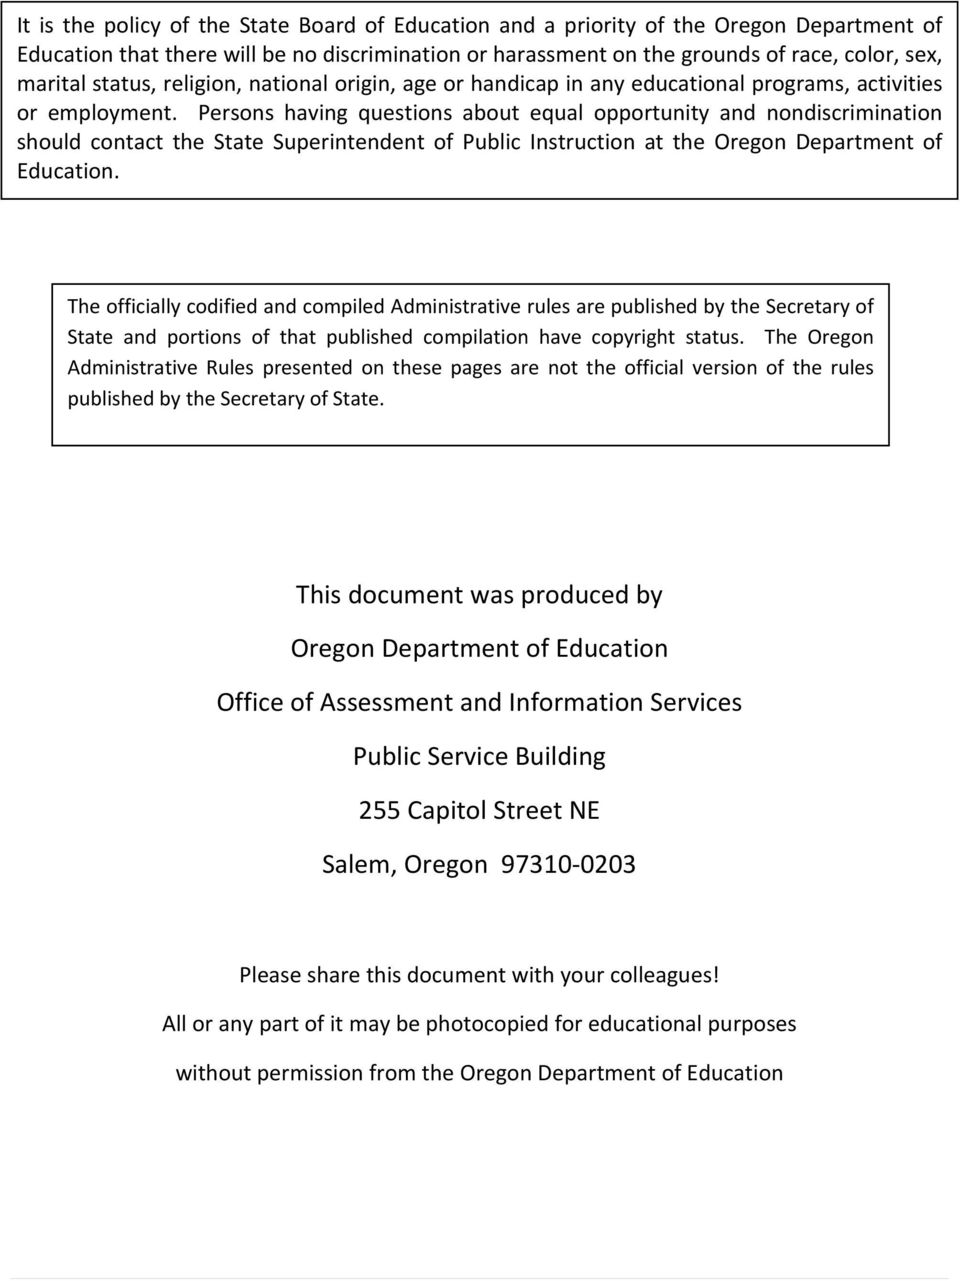 Persons having questions about equal opportunity and nondiscrimination should contact the State Superintendent of Public Instruction at the Oregon Department of Education.